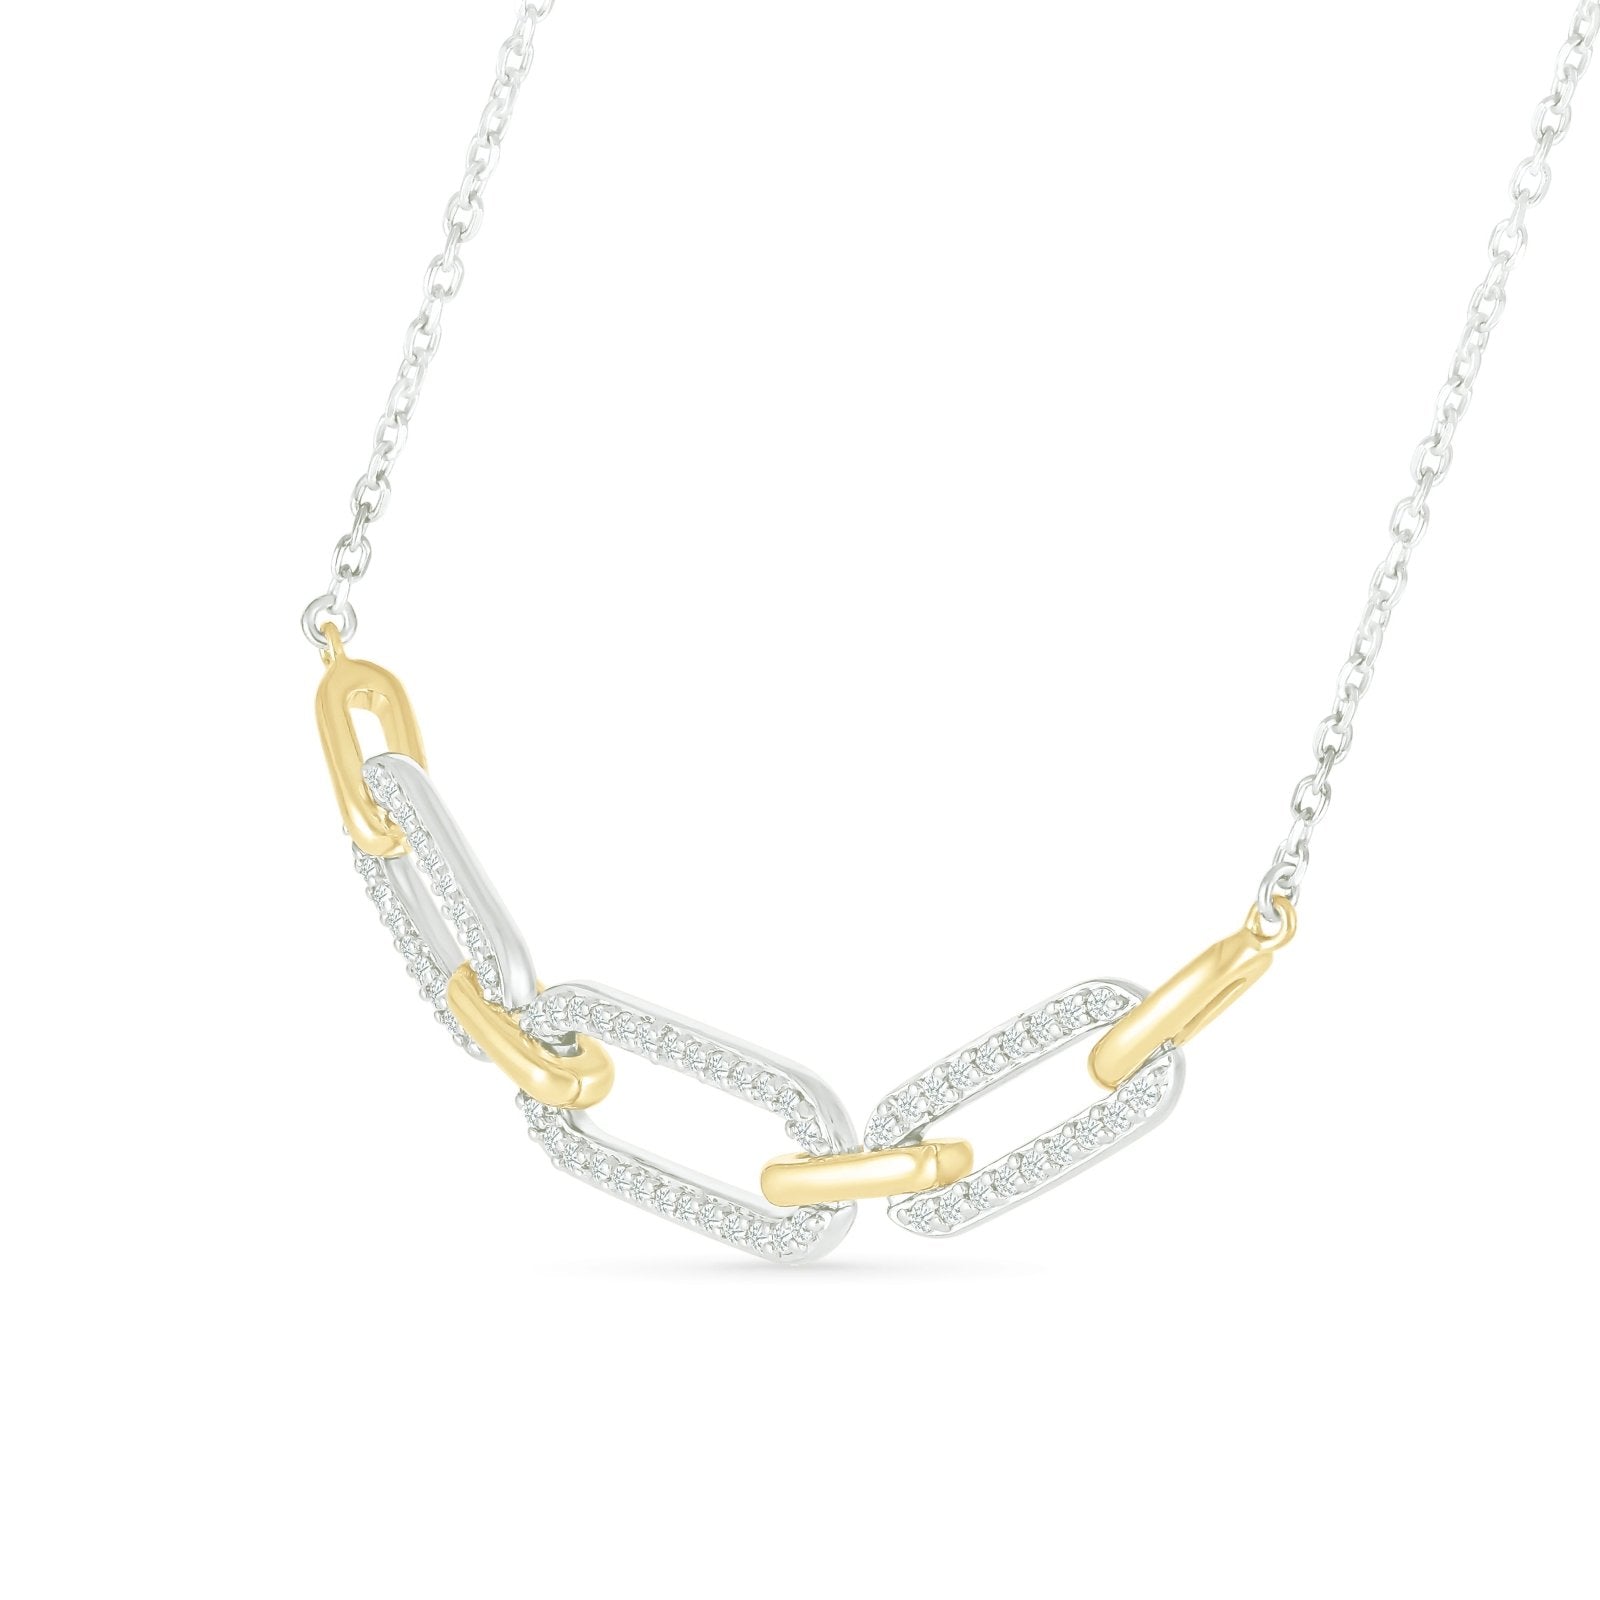 Interlocking Diamond and Gold Oval Pendant with Seven Links Necklace Necklaces Estella Collection 32689 925 Diamond Sterling Silver #tag4# #tag5# #tag6# #tag7# #tag8# #tag9# #tag10#